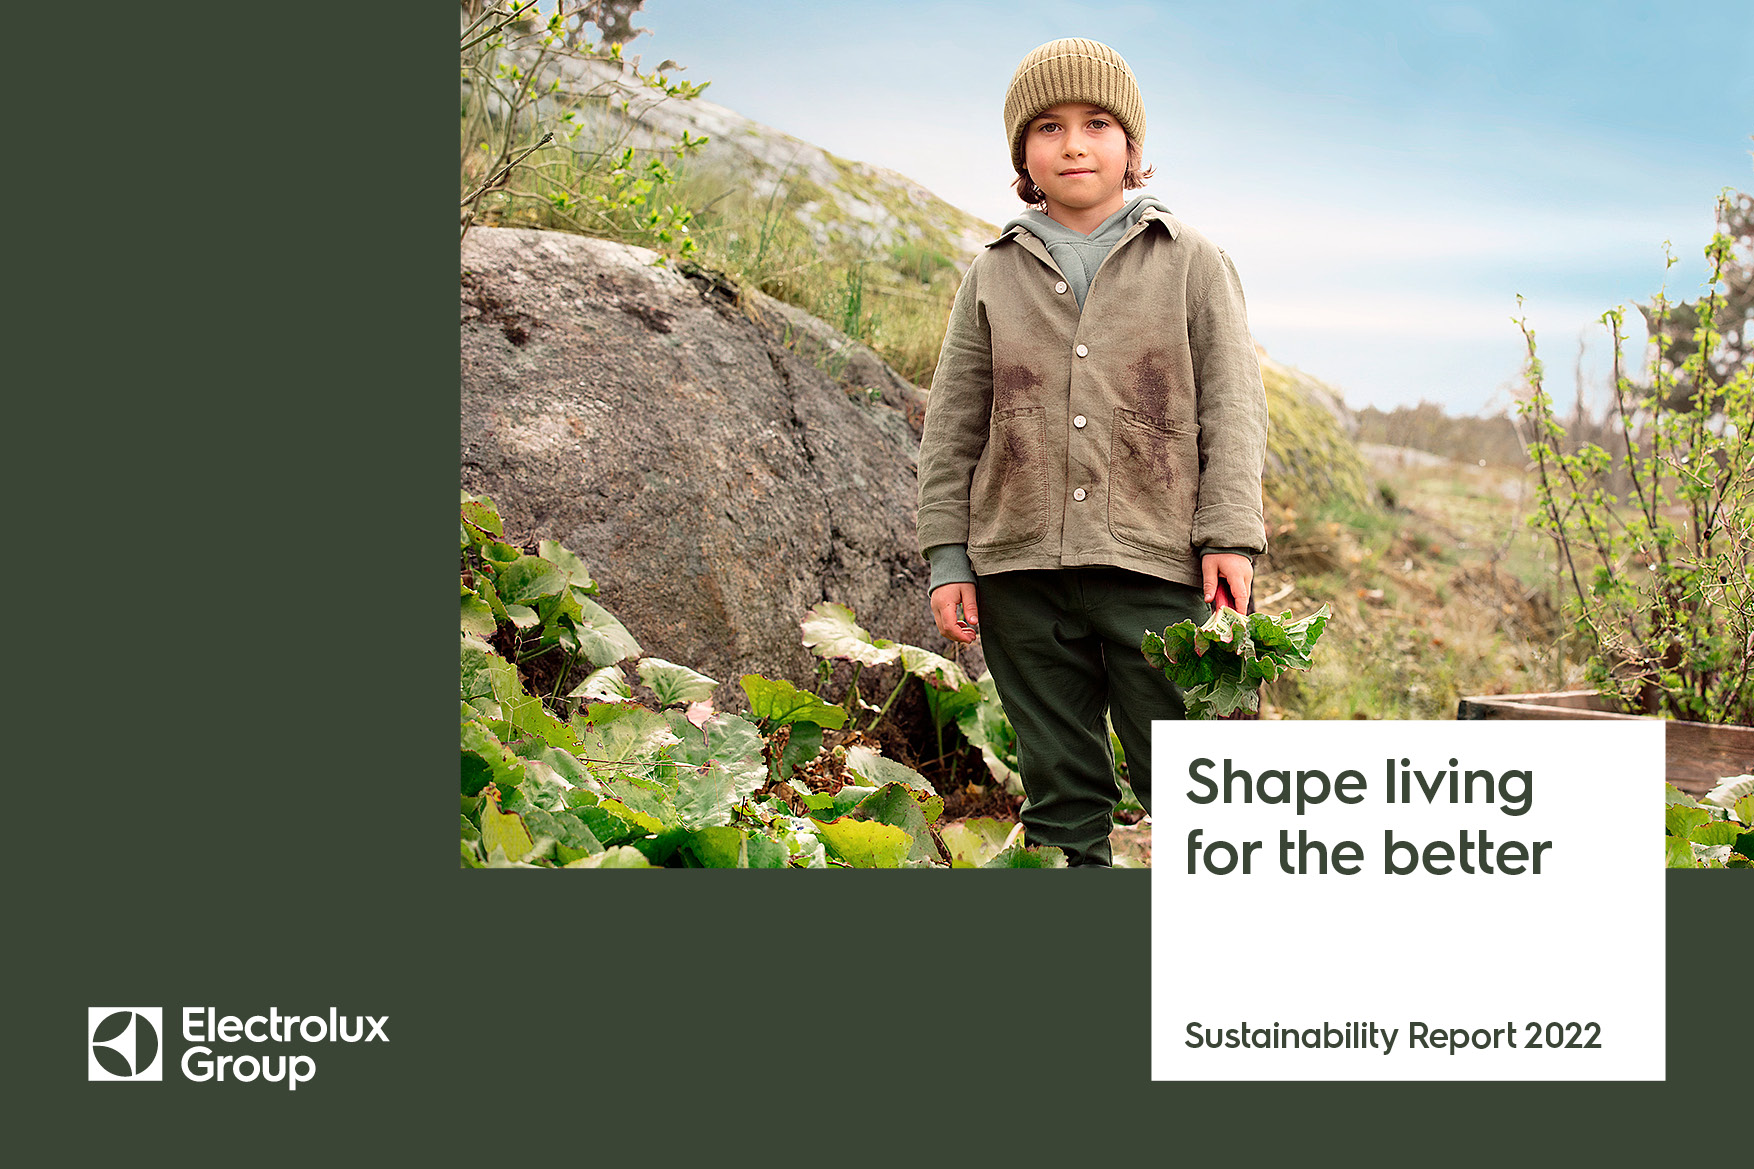 "Shape living for the better Sustainability Report 2022" with Electrolux Group logo and child